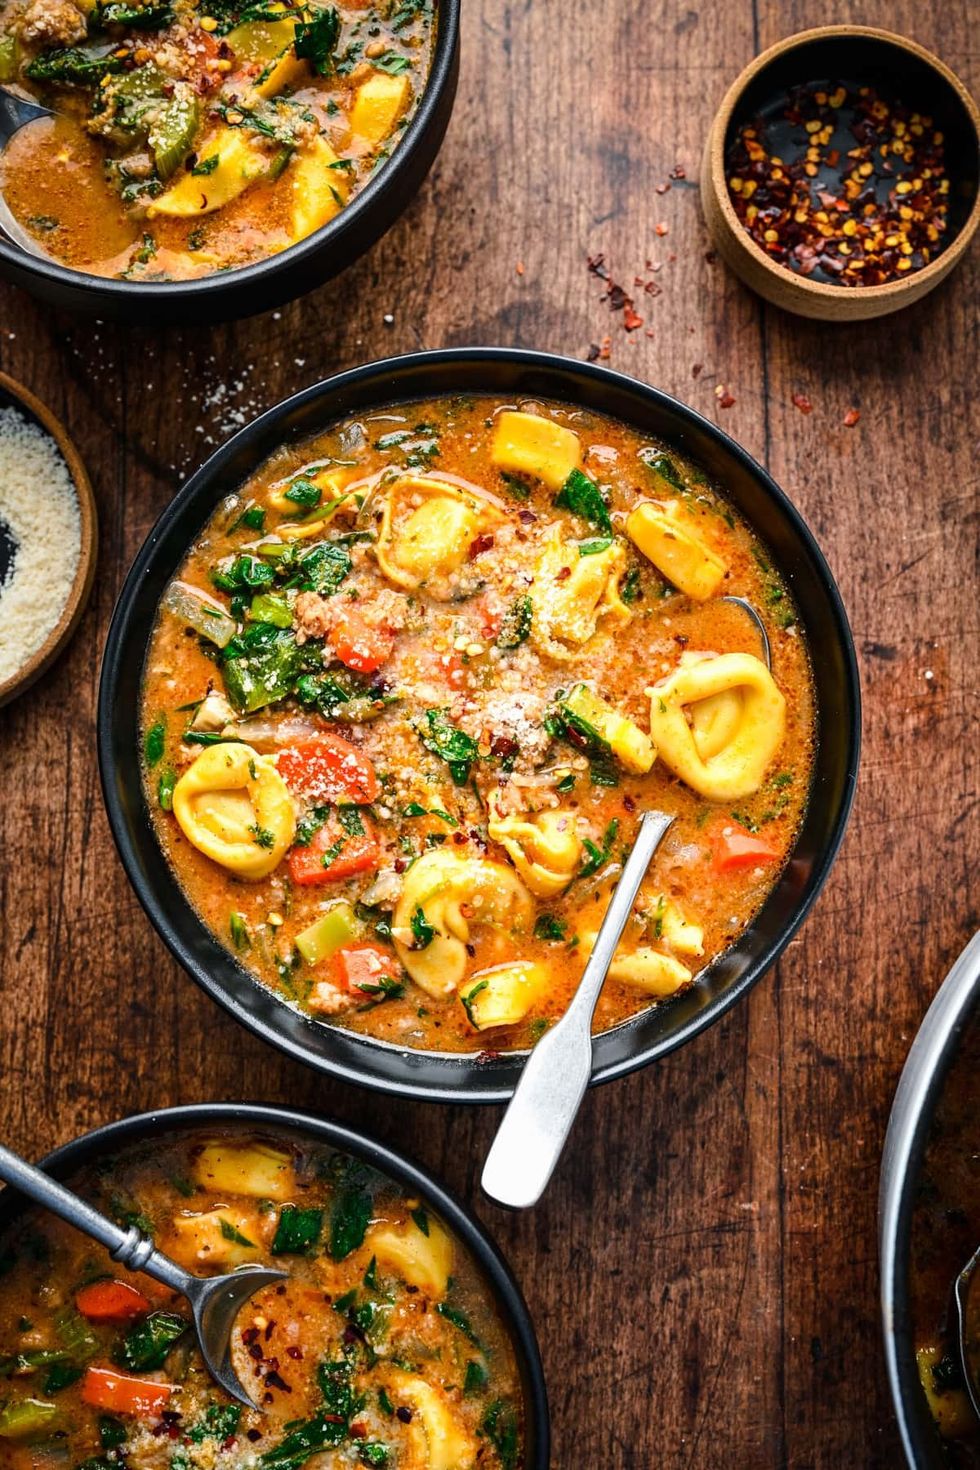 Multiple bowls of vegan tortellini soup are sitting on a wooden table.